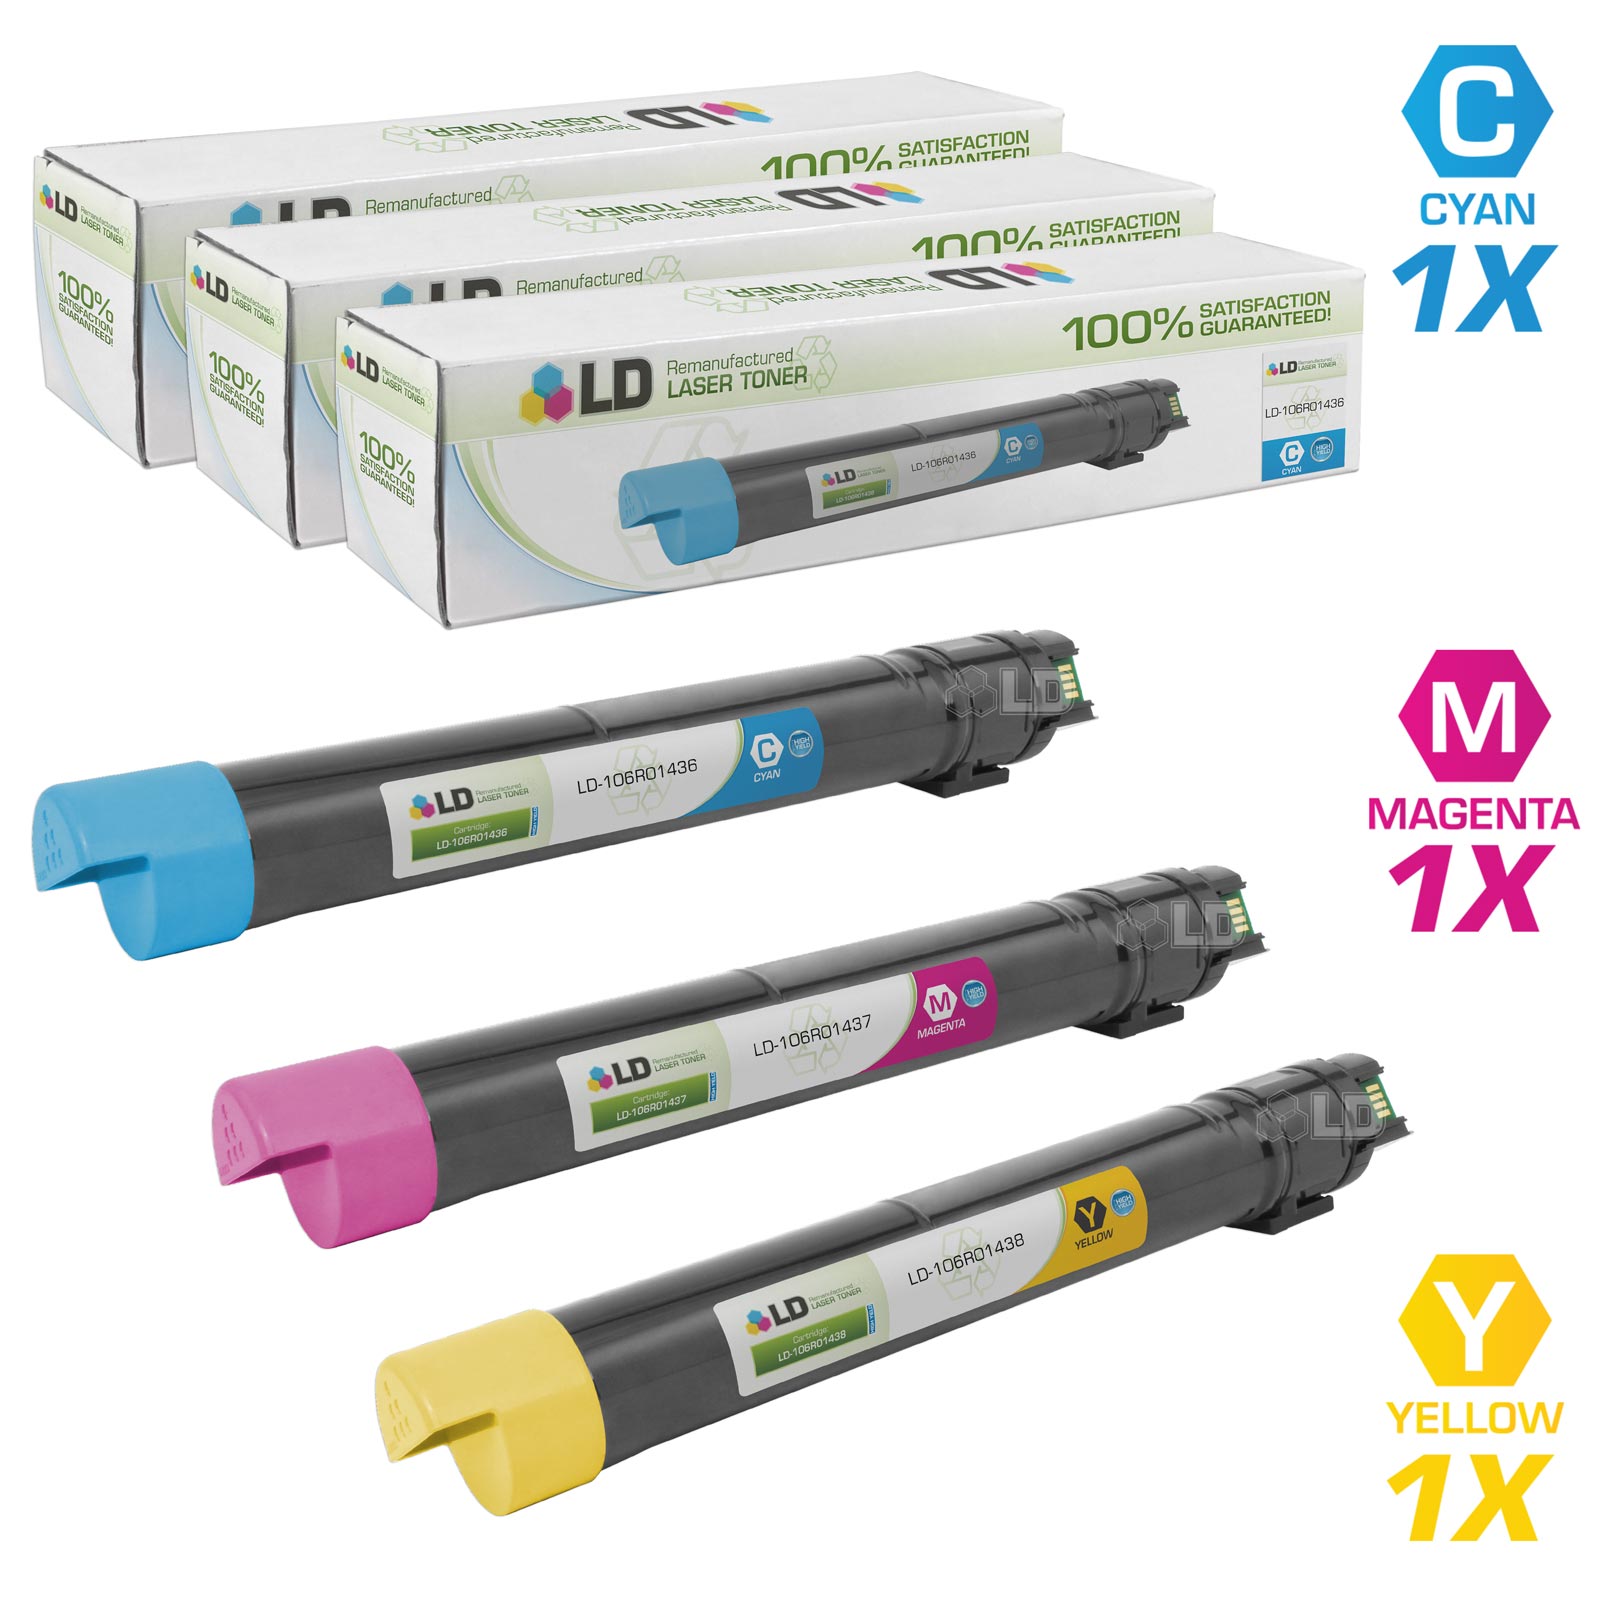 LD Remanufactured Replacement for Xerox Set of 3 HY Laser Toner Cartridges: 1 106R01438 Cyan, 1 106R01437 Magenta, 1 106R01436 Yellow for Xerox Phaser 7500, 7500DN, 7500DT, 7500DX, and 7500N s - image 1 of 6